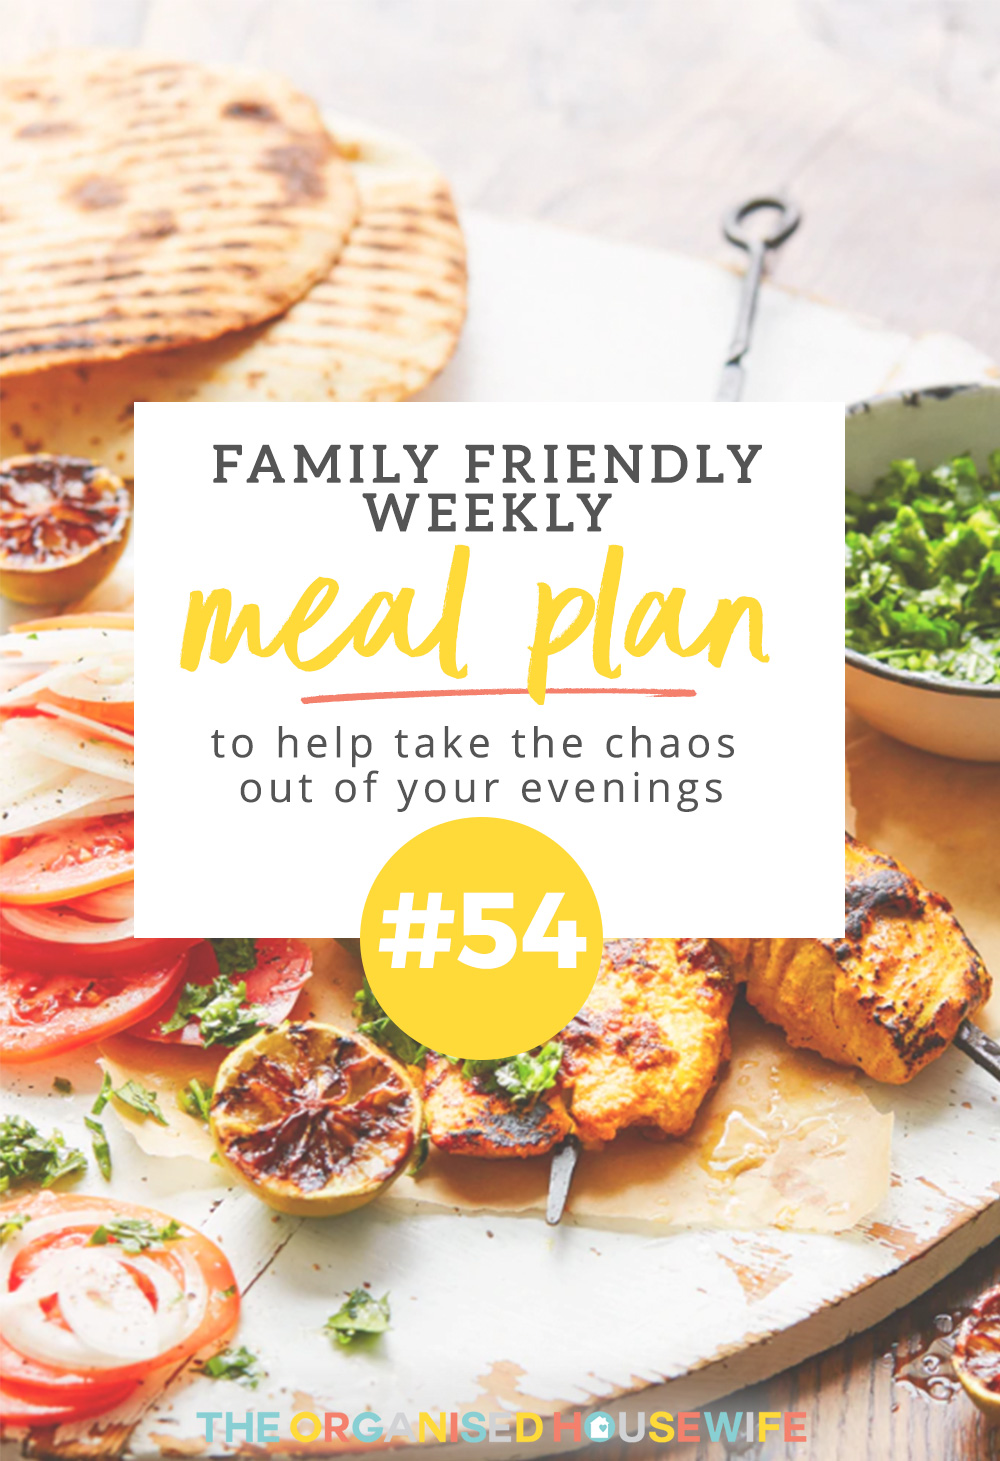 There is a common misconception that meal planning means you have to arrange extravagant meals. That is not the case at all! 